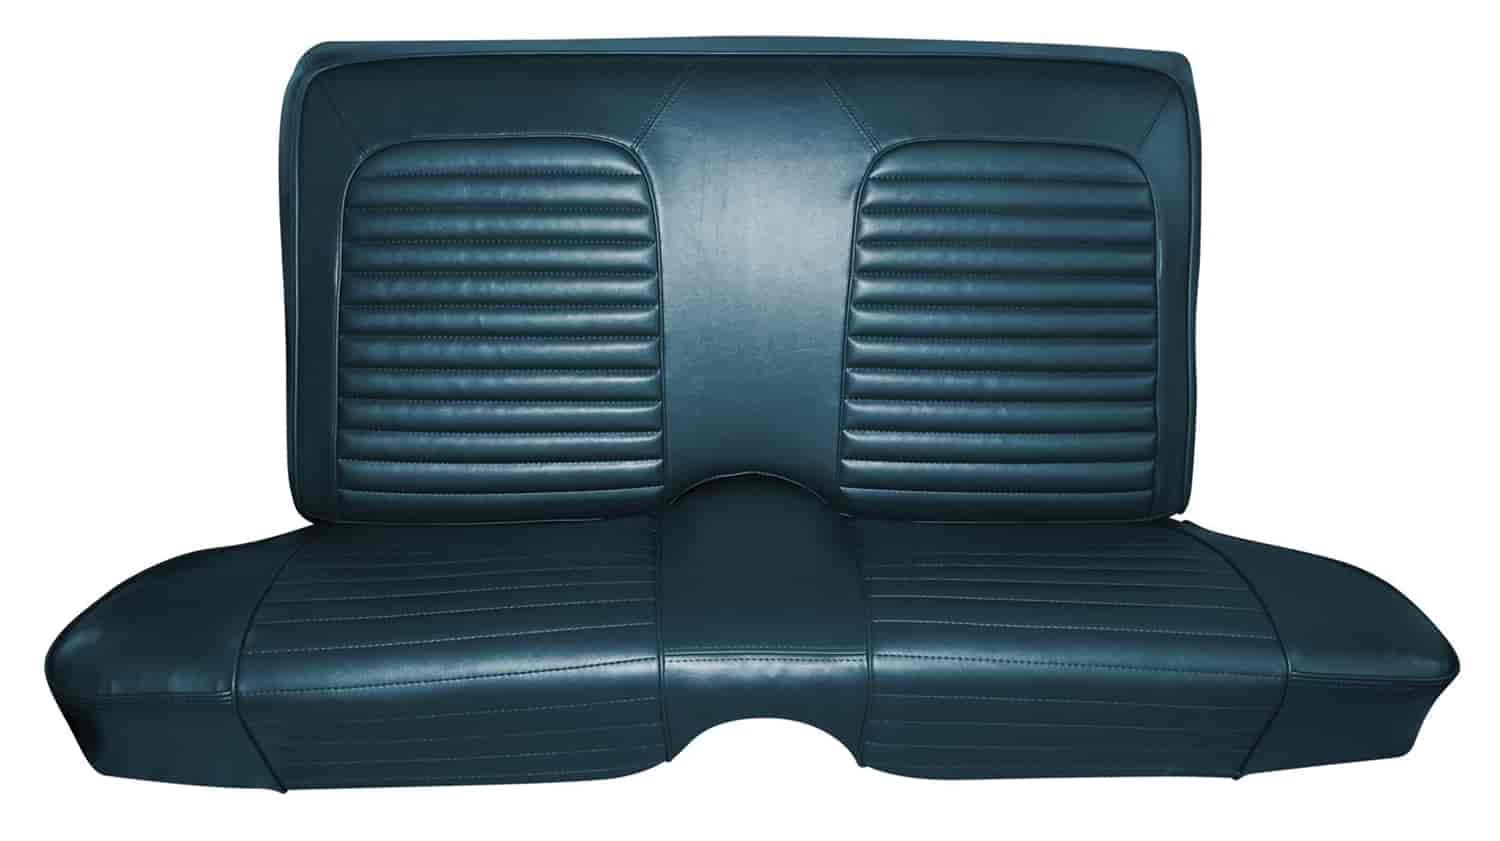 1963 Ford Falcon Futura 2-Door Hardtop Interior Rear Bench Seat Upholstery for Vehicles with a Front Bench Seat